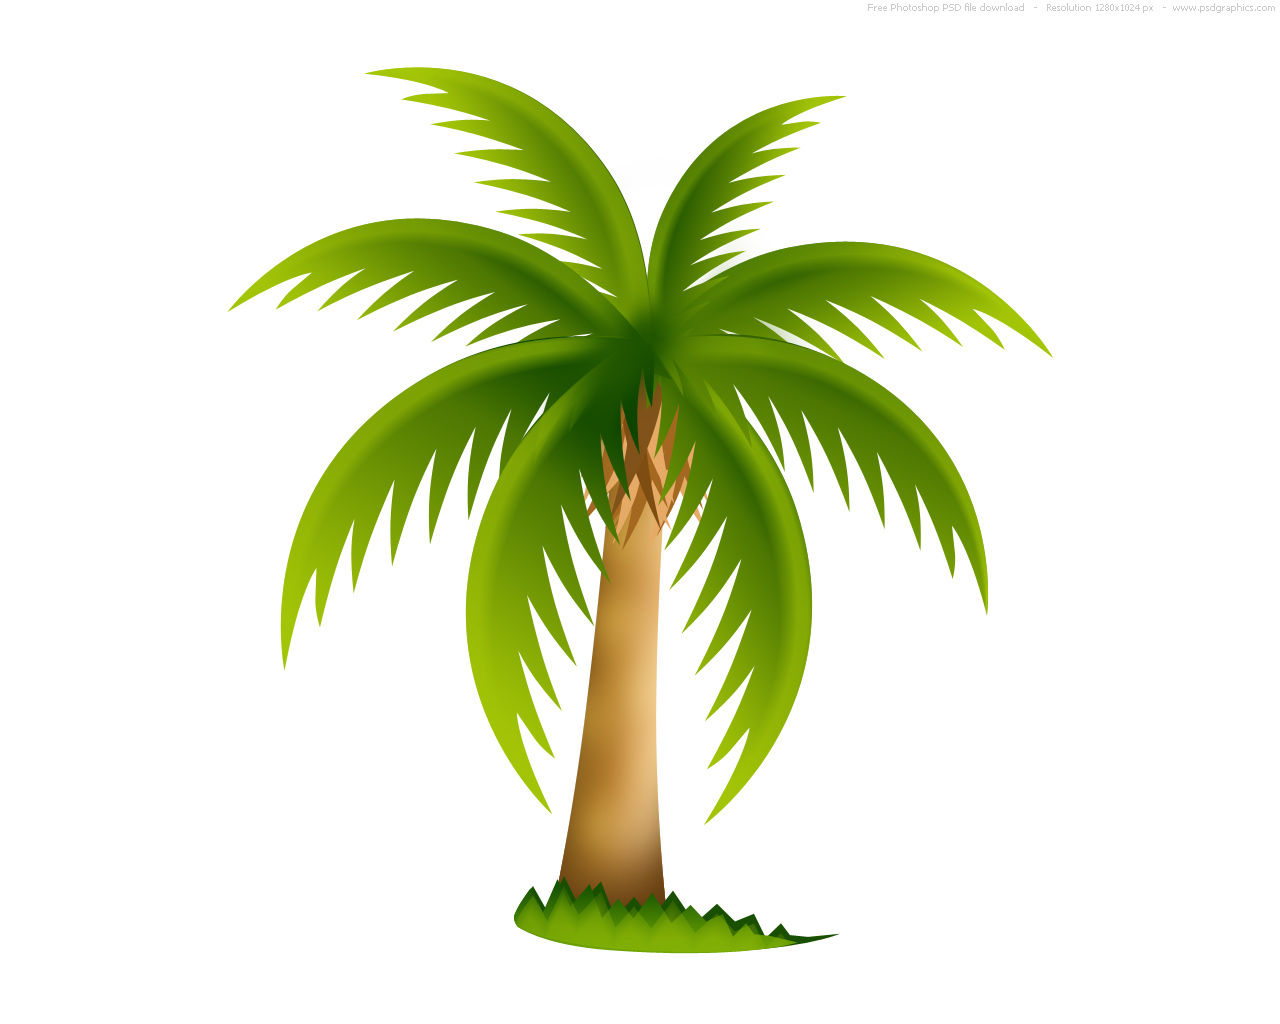 Palm Tree | Free Images at Clker.com - vector clip art online ...